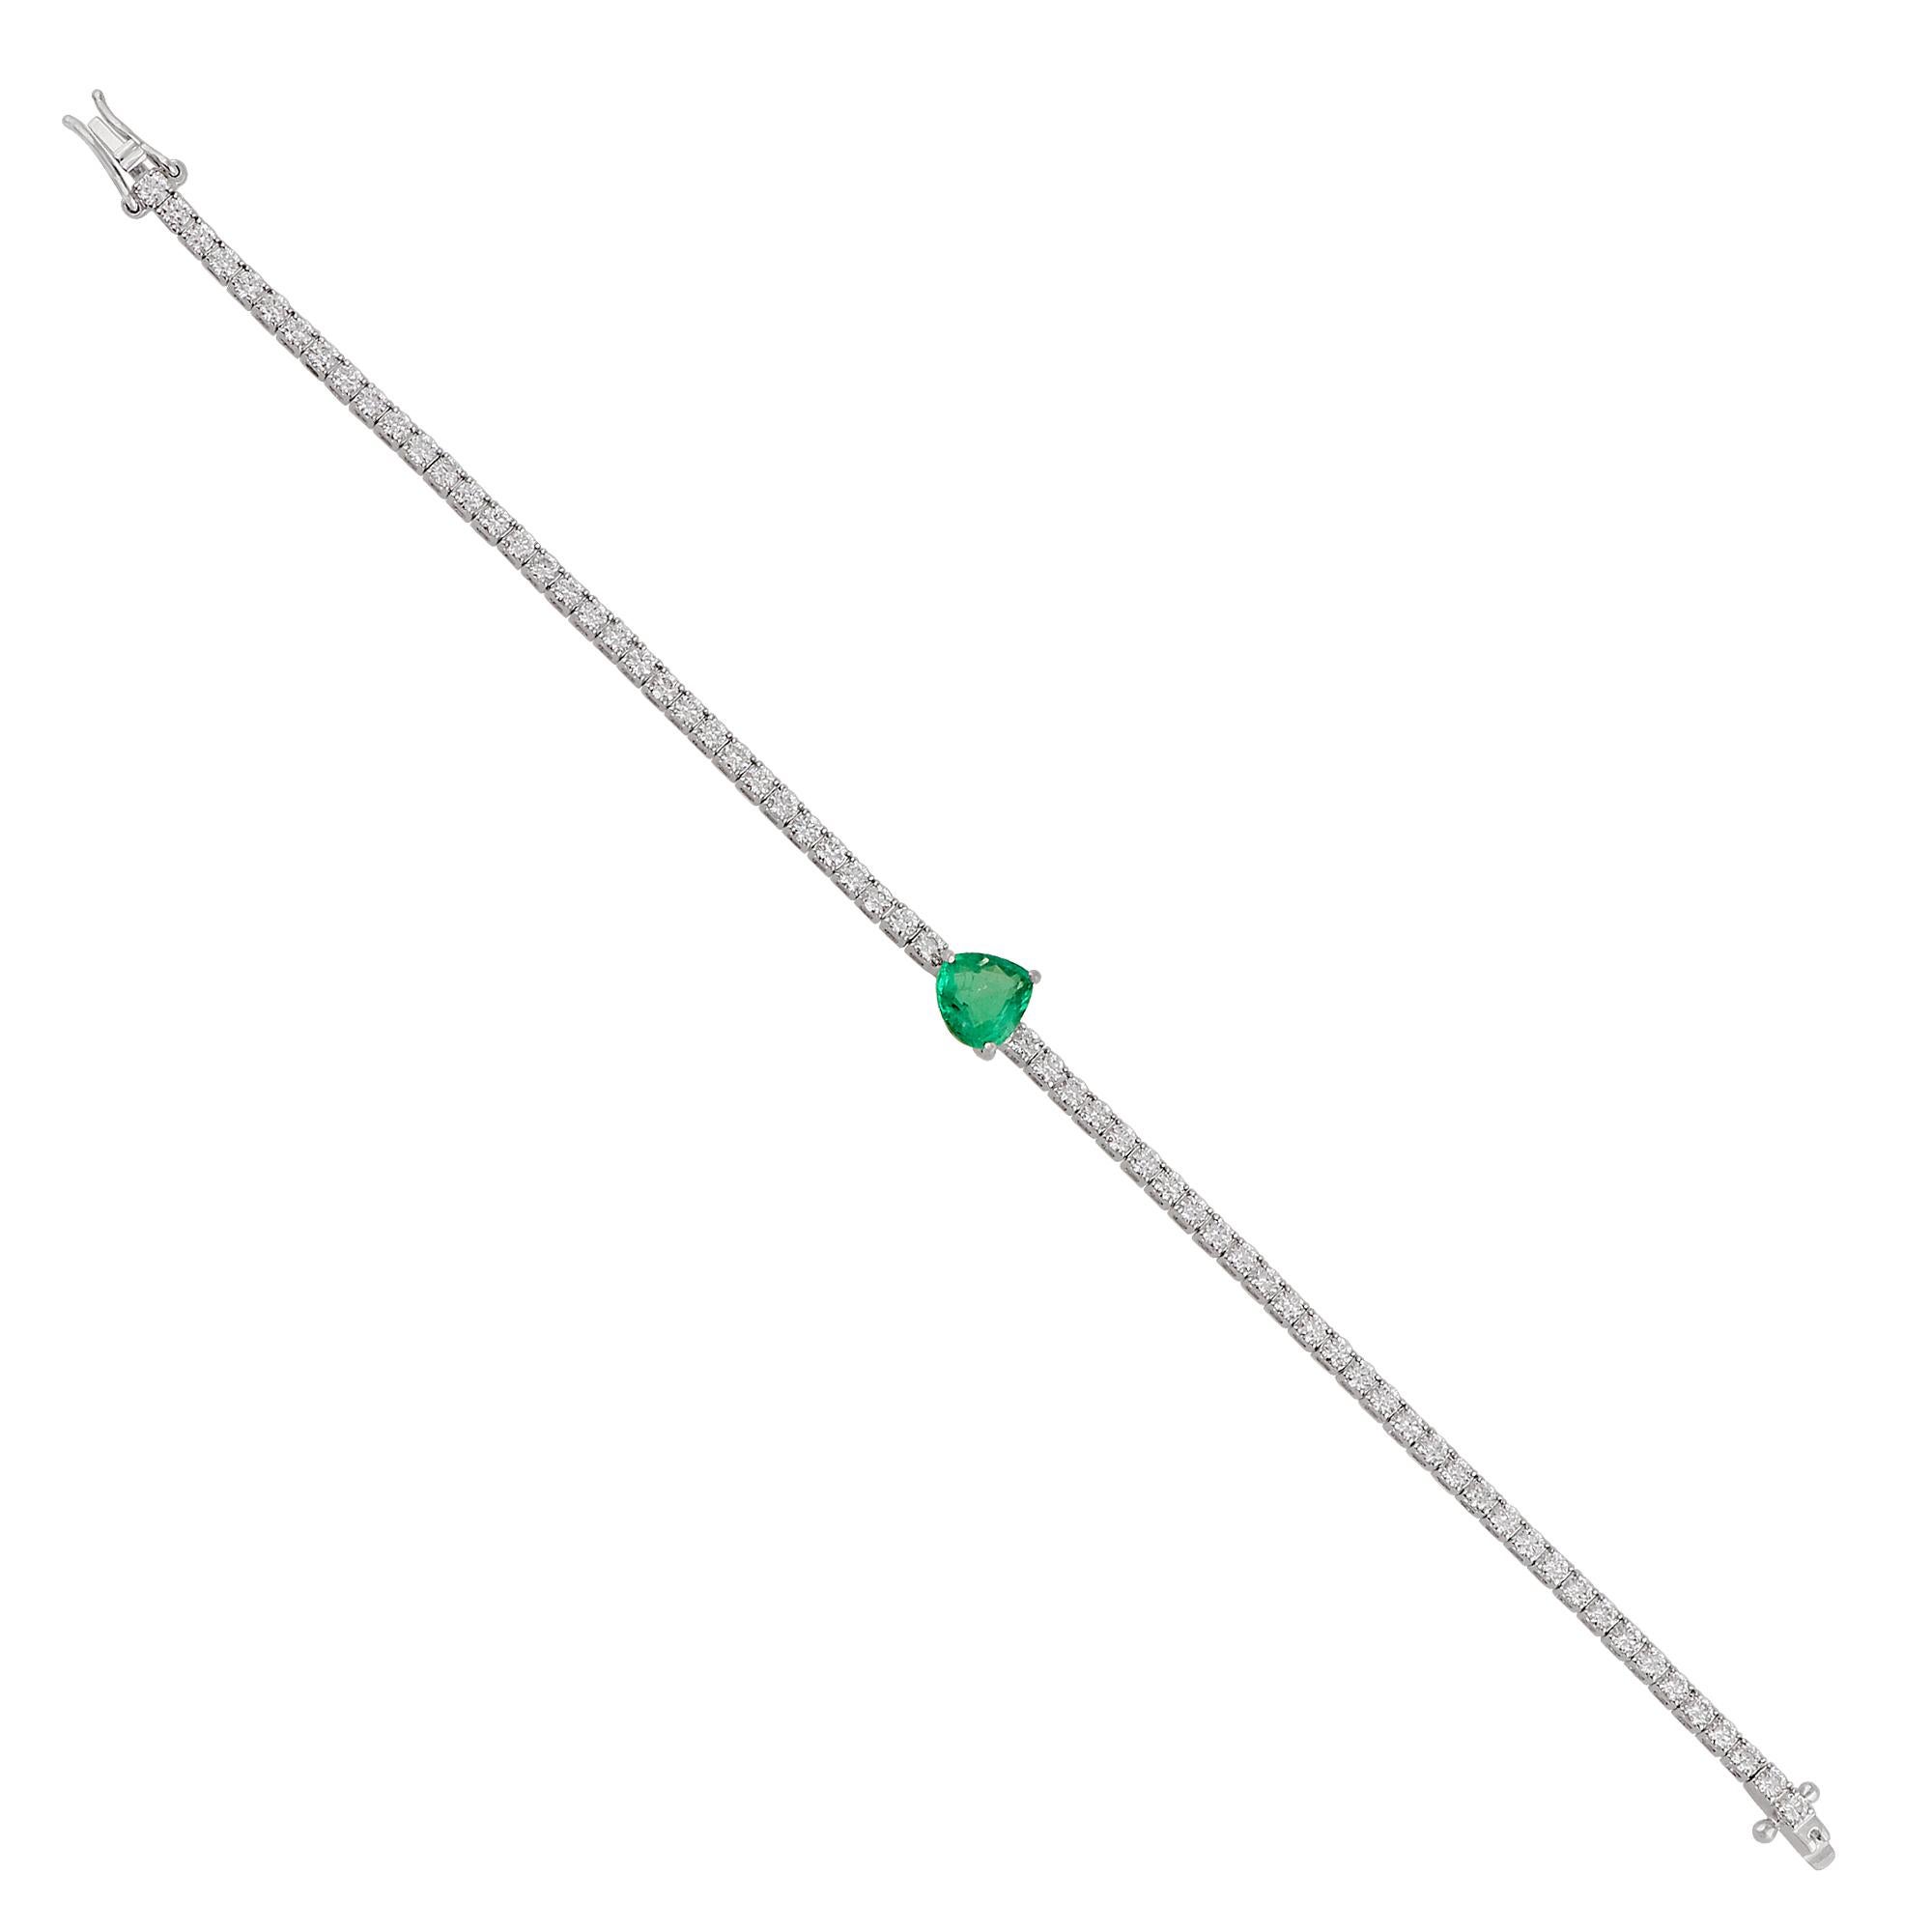 This emerald and diamond bracelet is a versatile piece that can be worn for special occasions or as an everyday accessory. Its elegance and sophistication make it a perfect complement to formal attire, while its timeless design allows it to be worn